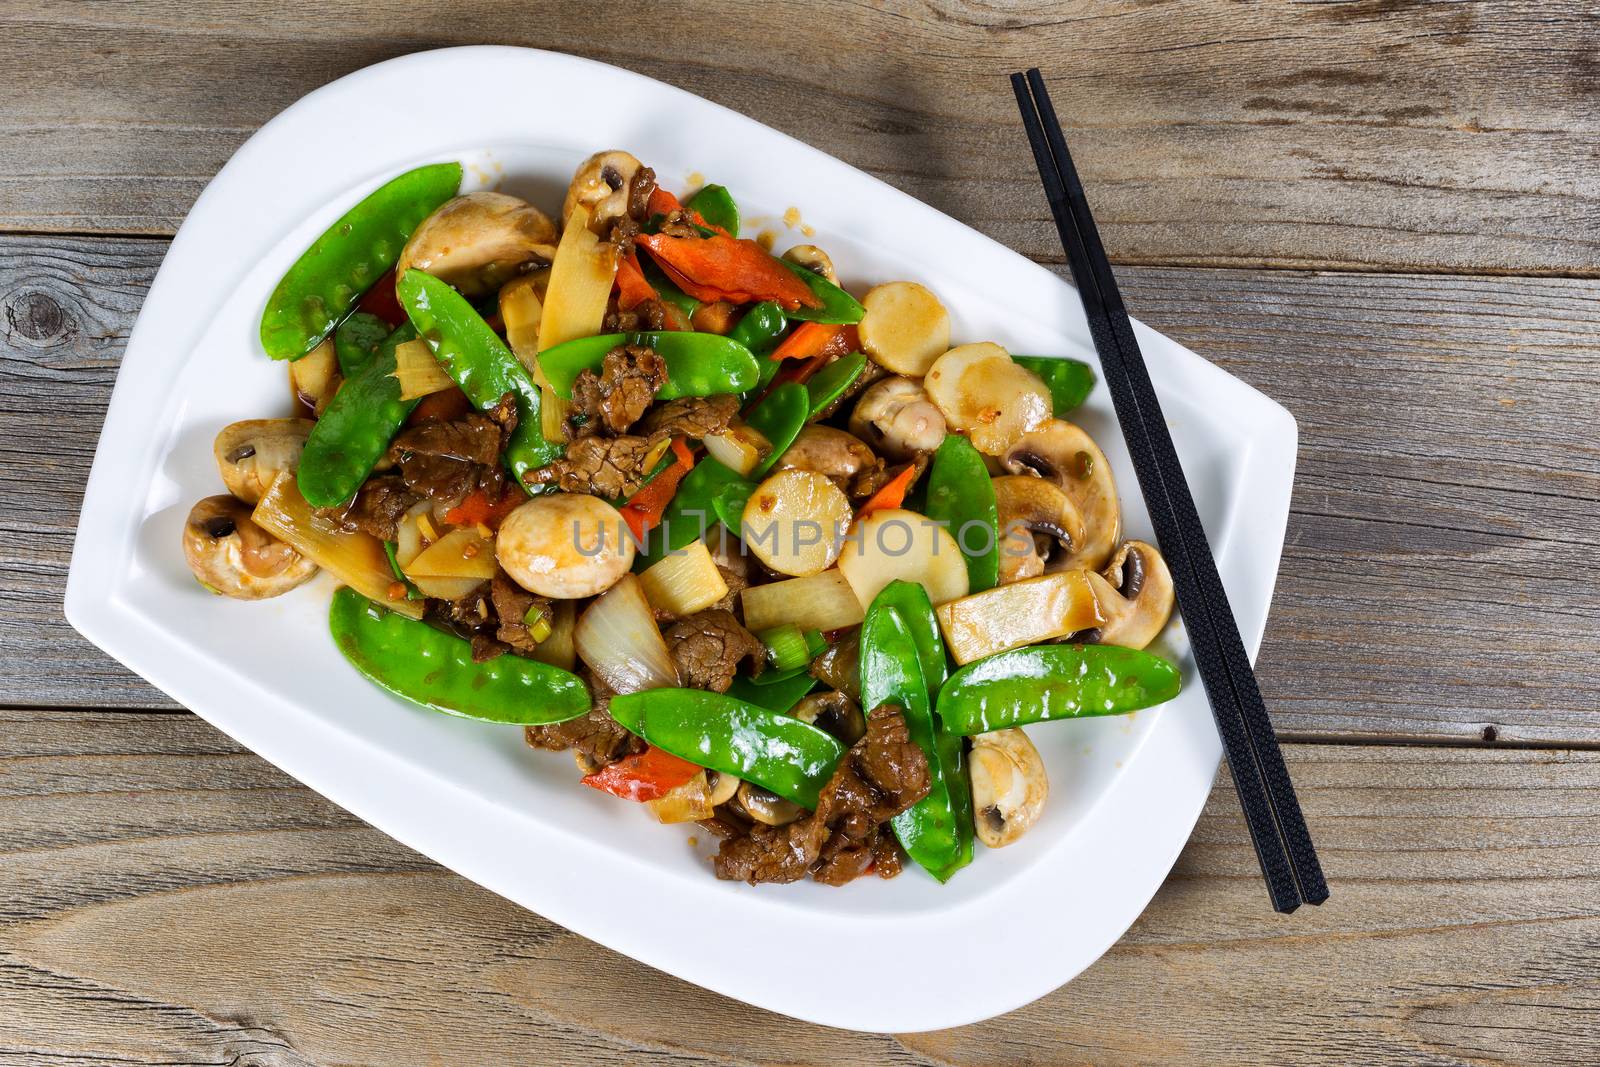 Chinese sliced beef and veggies dish ready to eat by tab1962